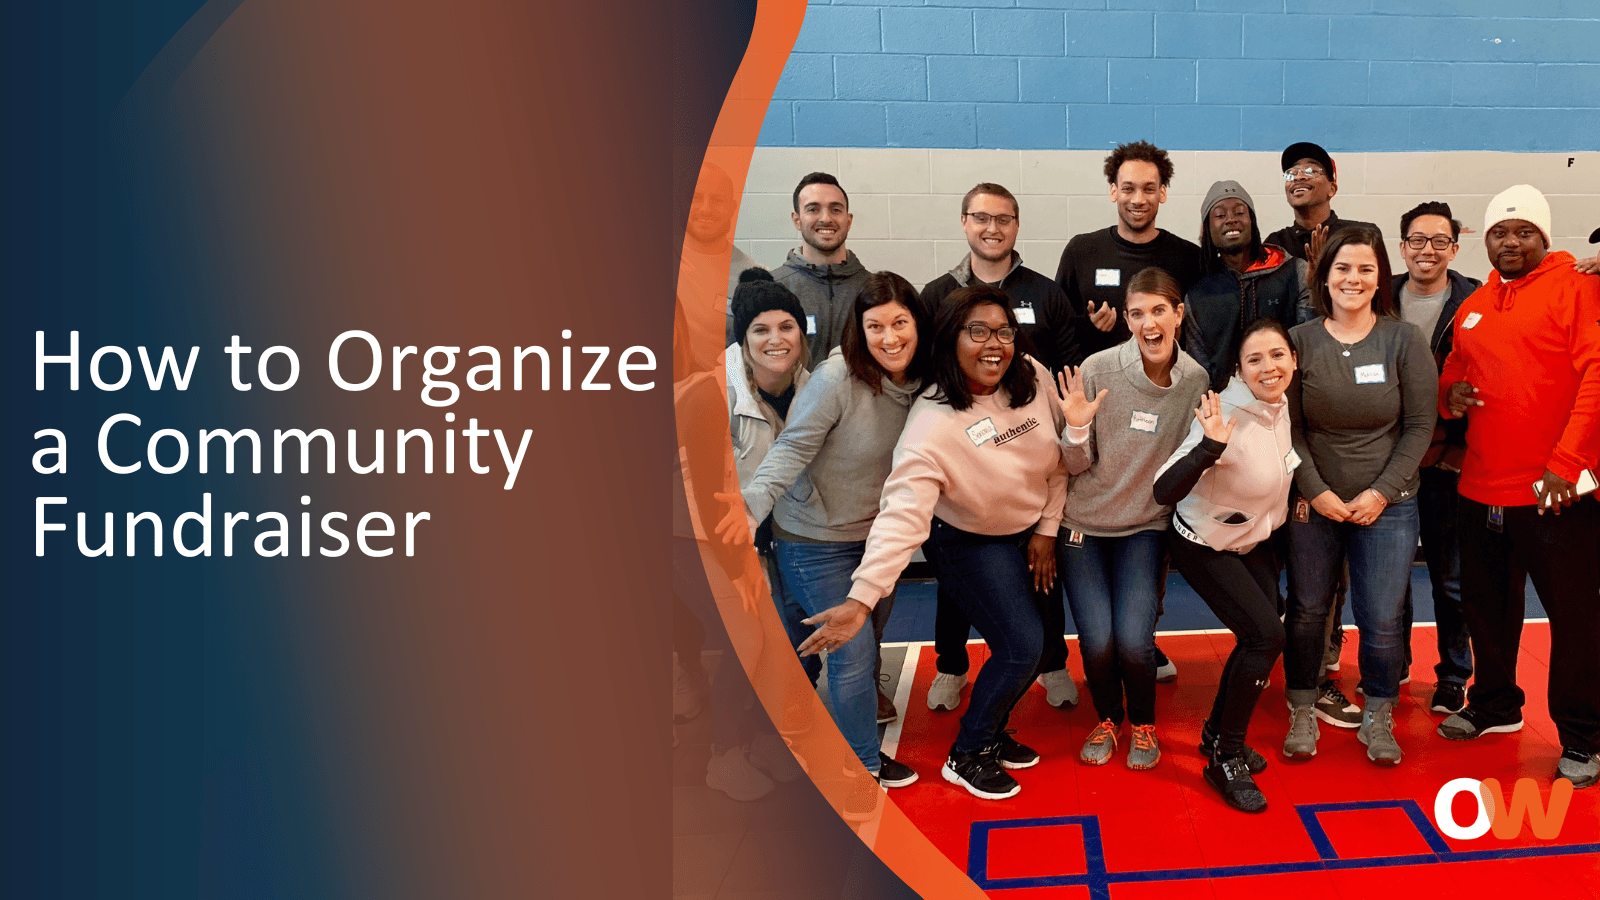 How to Organize a Community Fundraiser